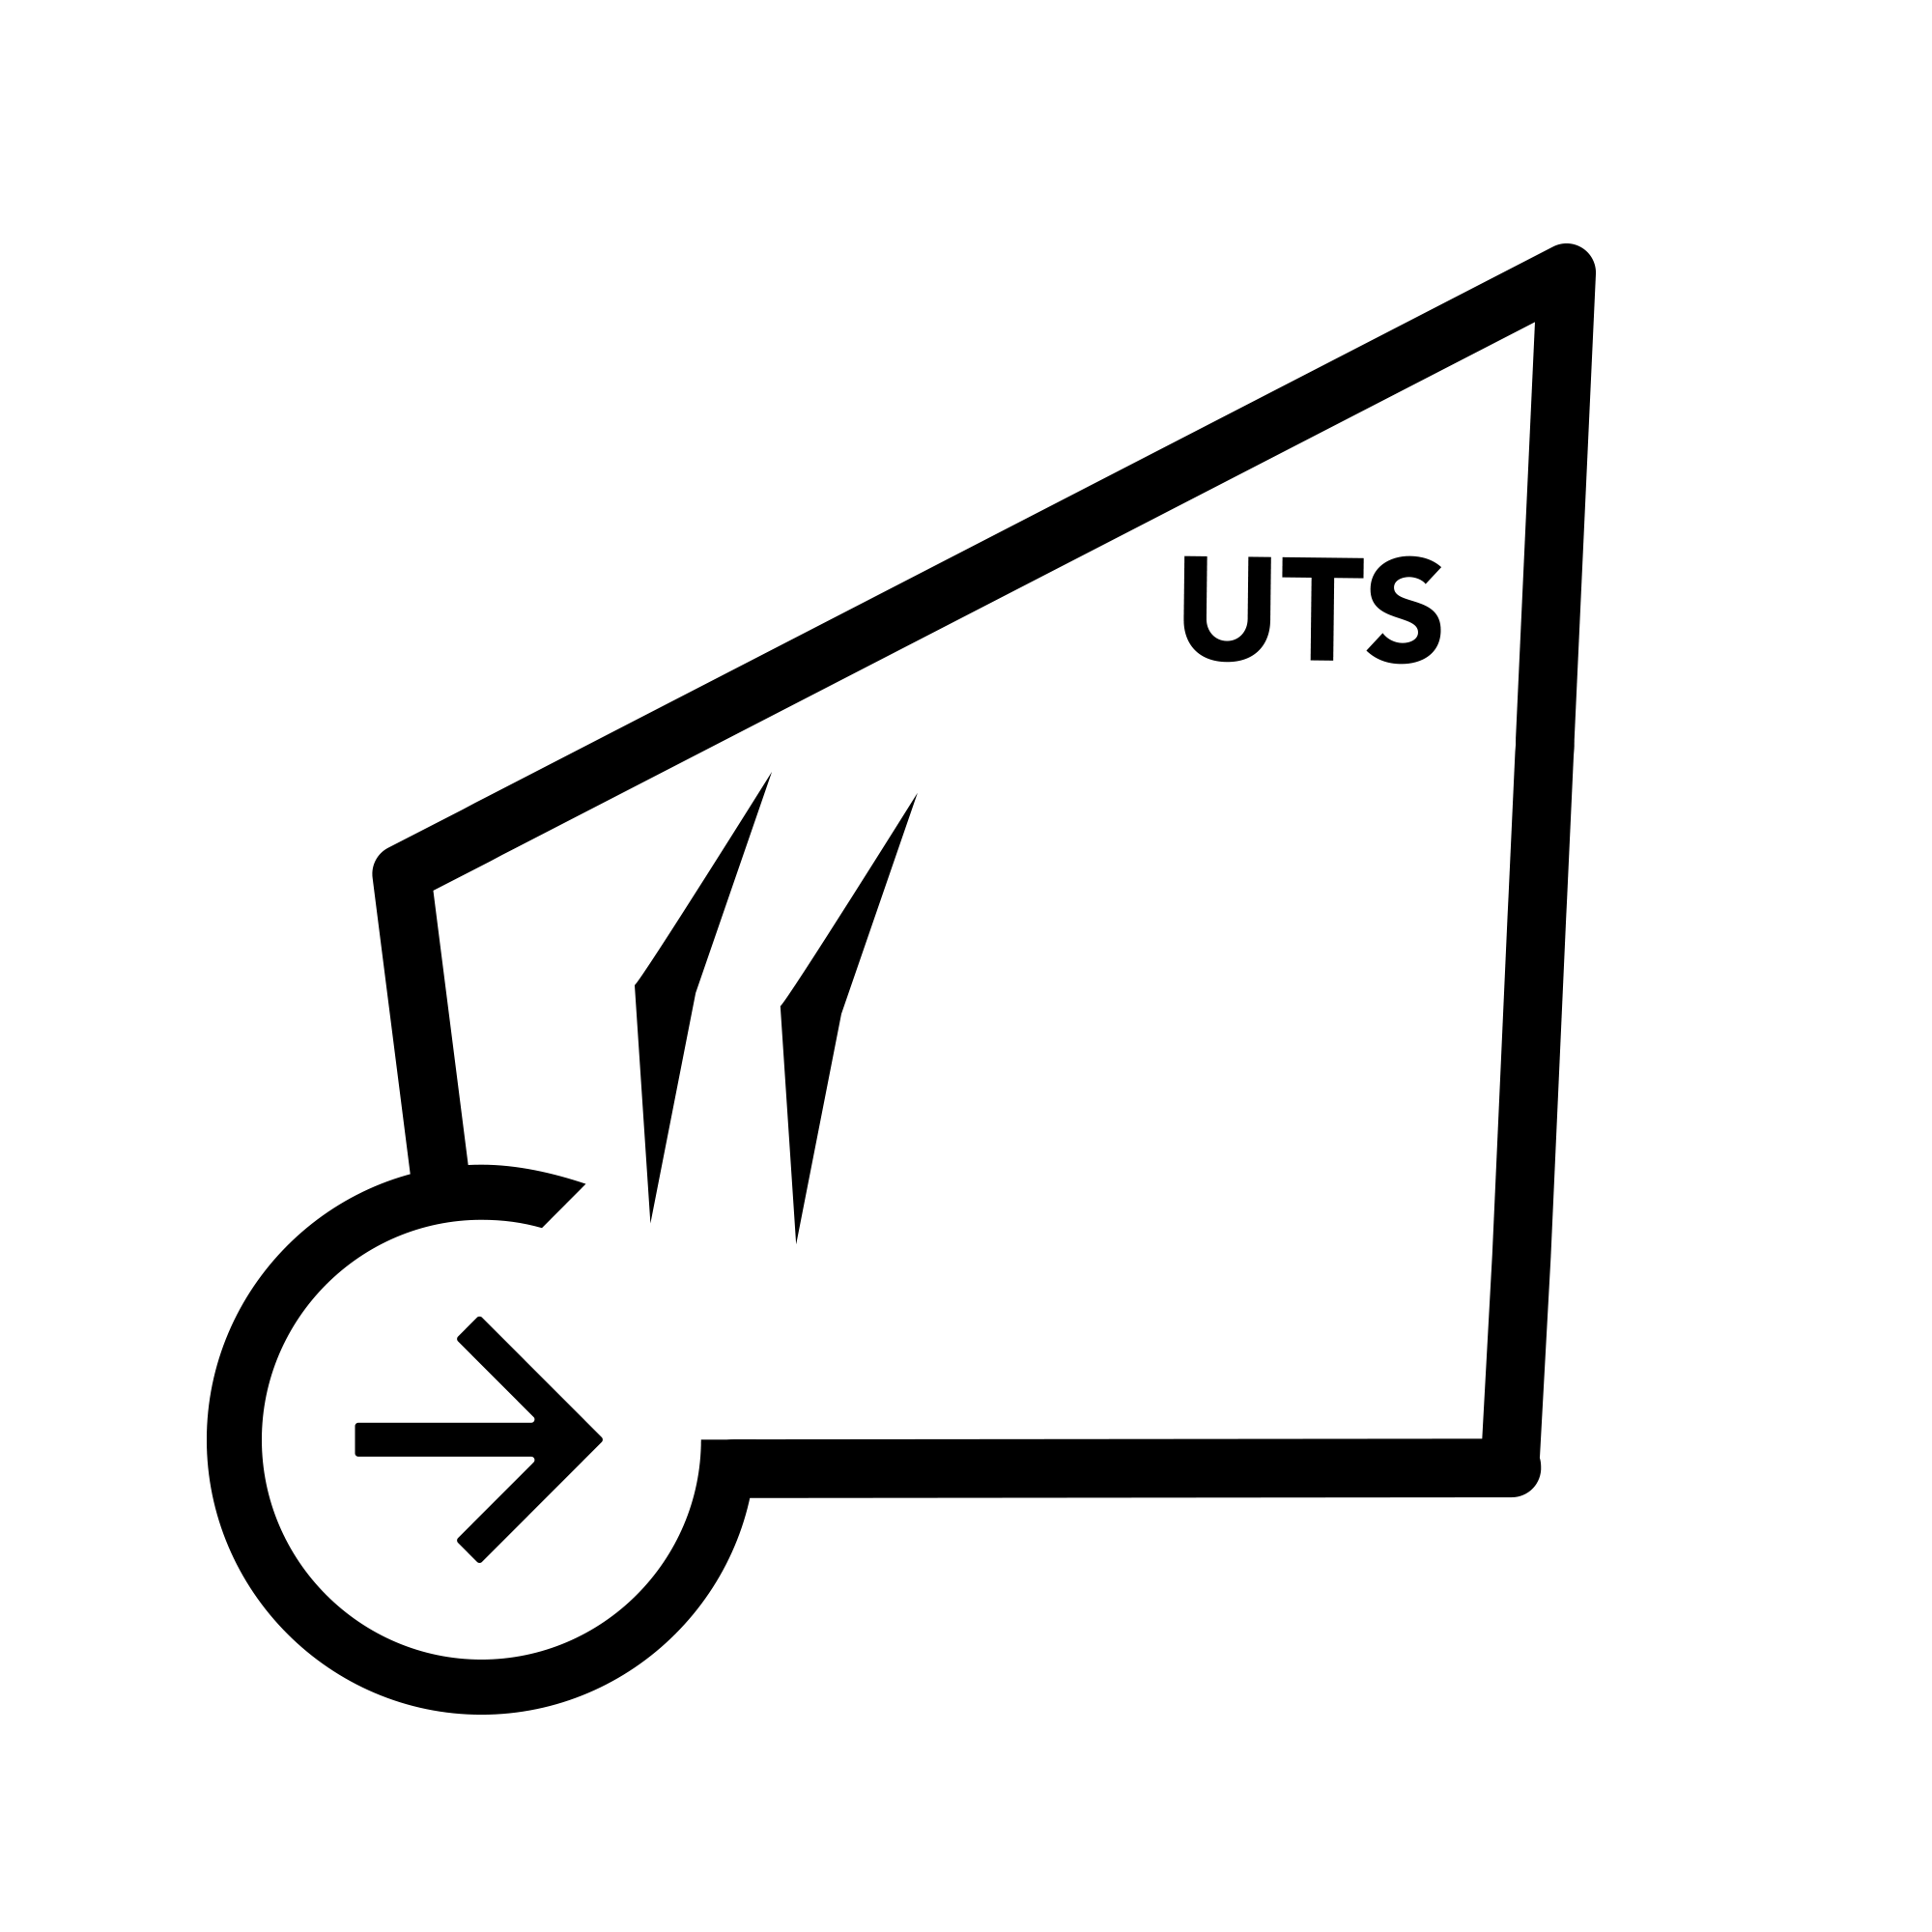  - 6. Guaranteed* entry to UTS.
A place in any UTS undergraduate degree is guaranteed on successful completion of their A Level with the required points.
